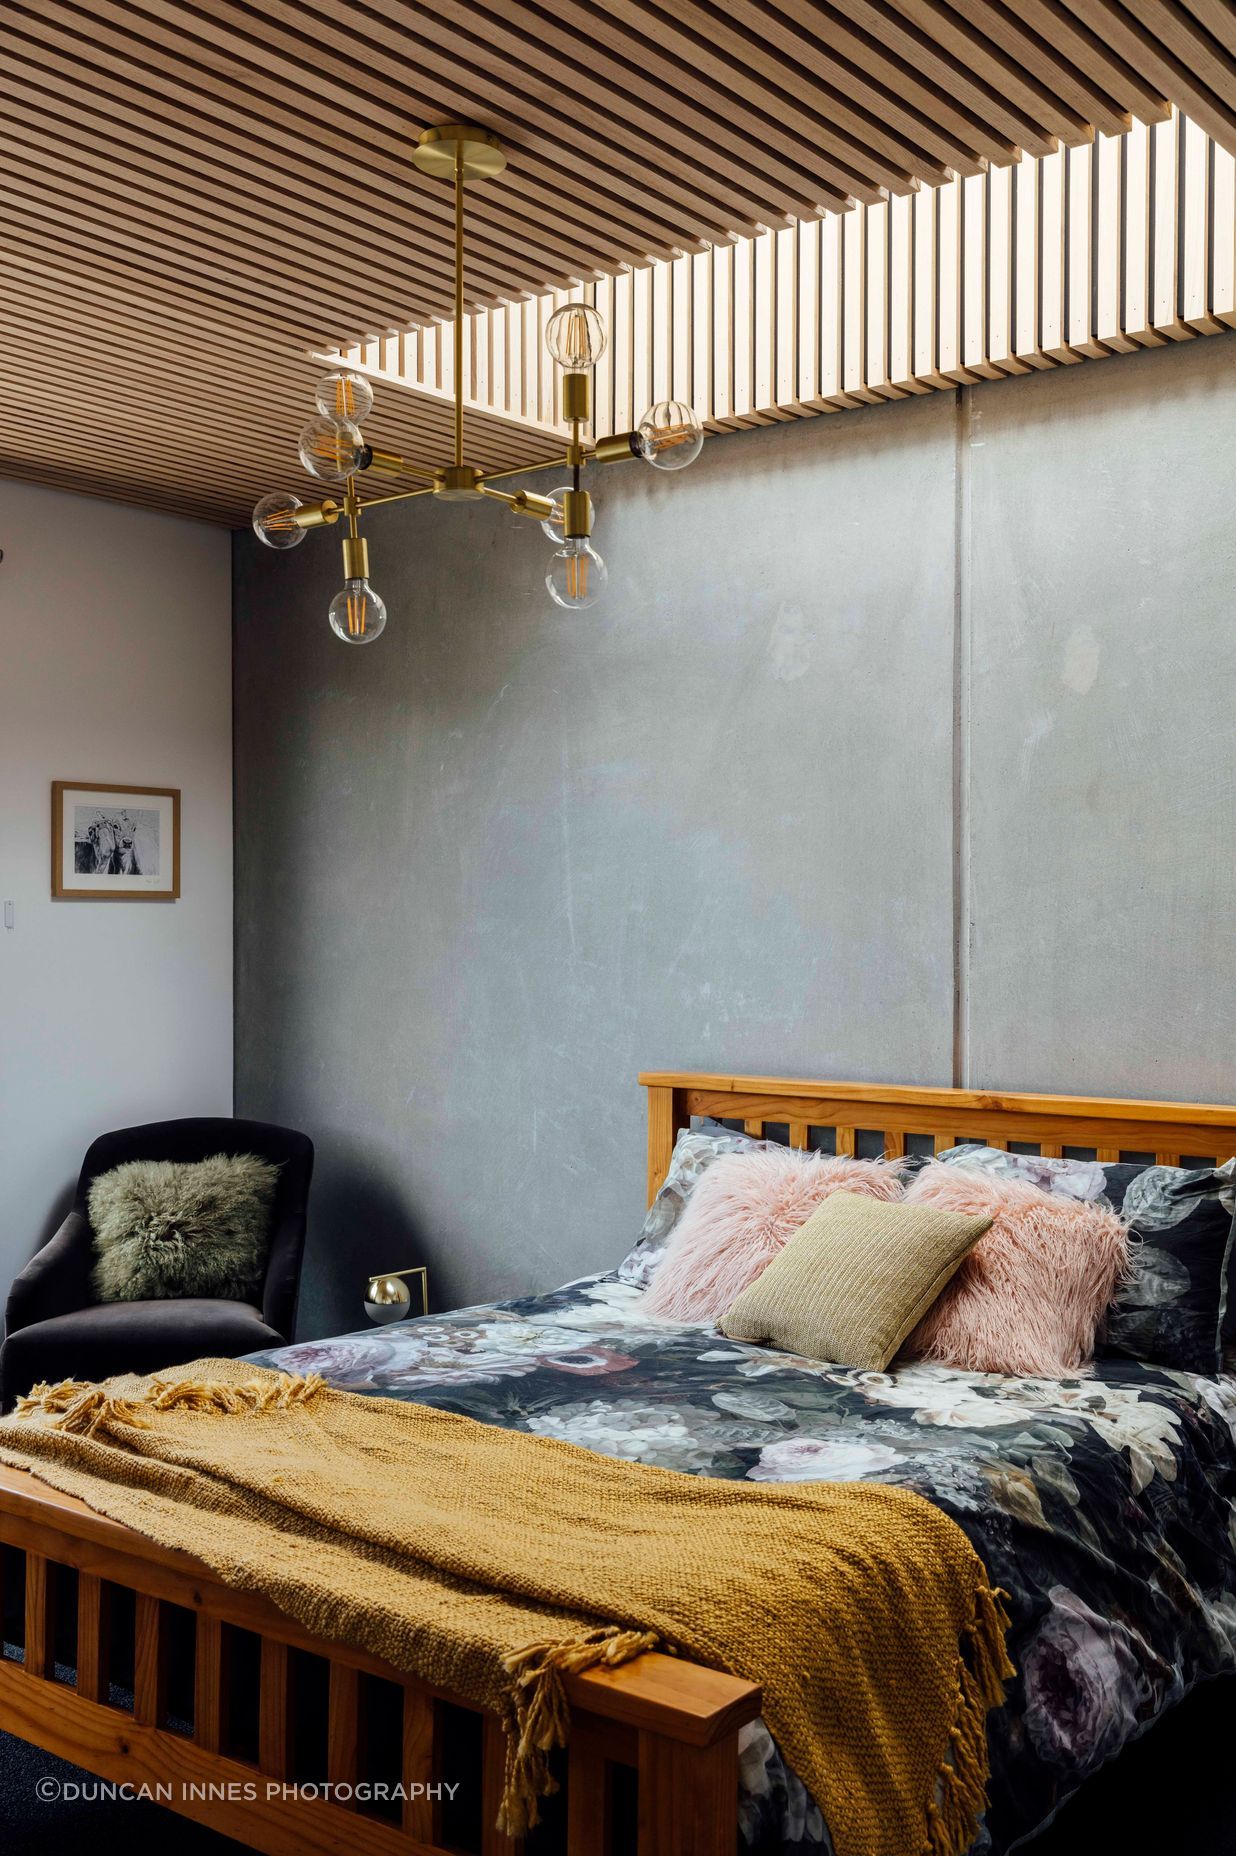 The guest bedroom, away from the main end of the house. “So if they did have guests stay for a bit longer, then they would get the opportunity to feel comfortable in their own space.”